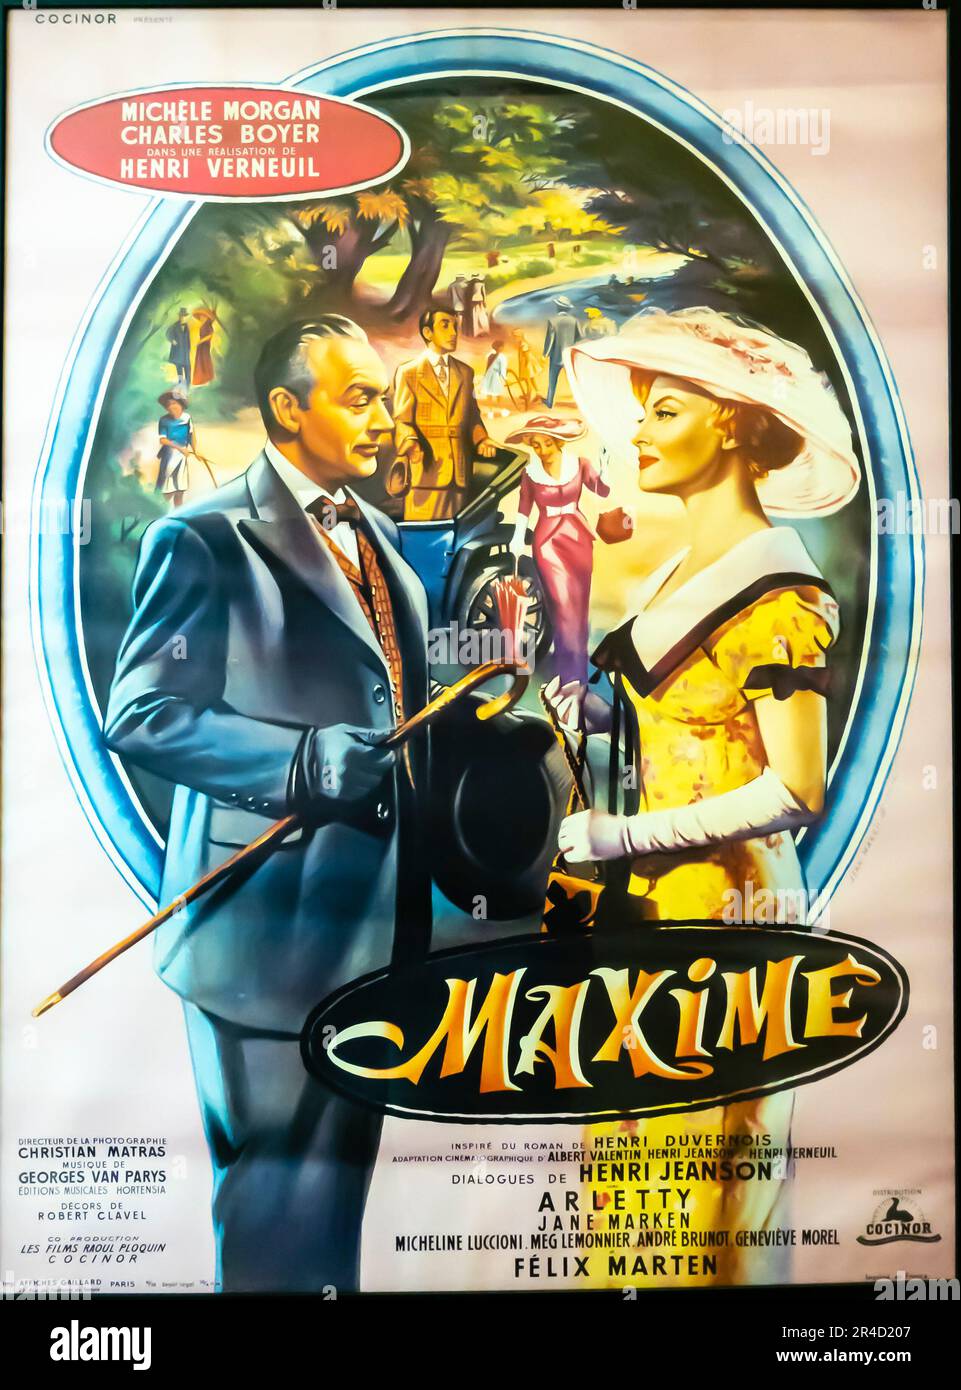 https://c8.alamy.com/comp/2R4D207/poster-of-a-french-film-maxime-directed-by-henri-verneuil-with-michle-morgan-charles-boyer-1958-2R4D207.jpg